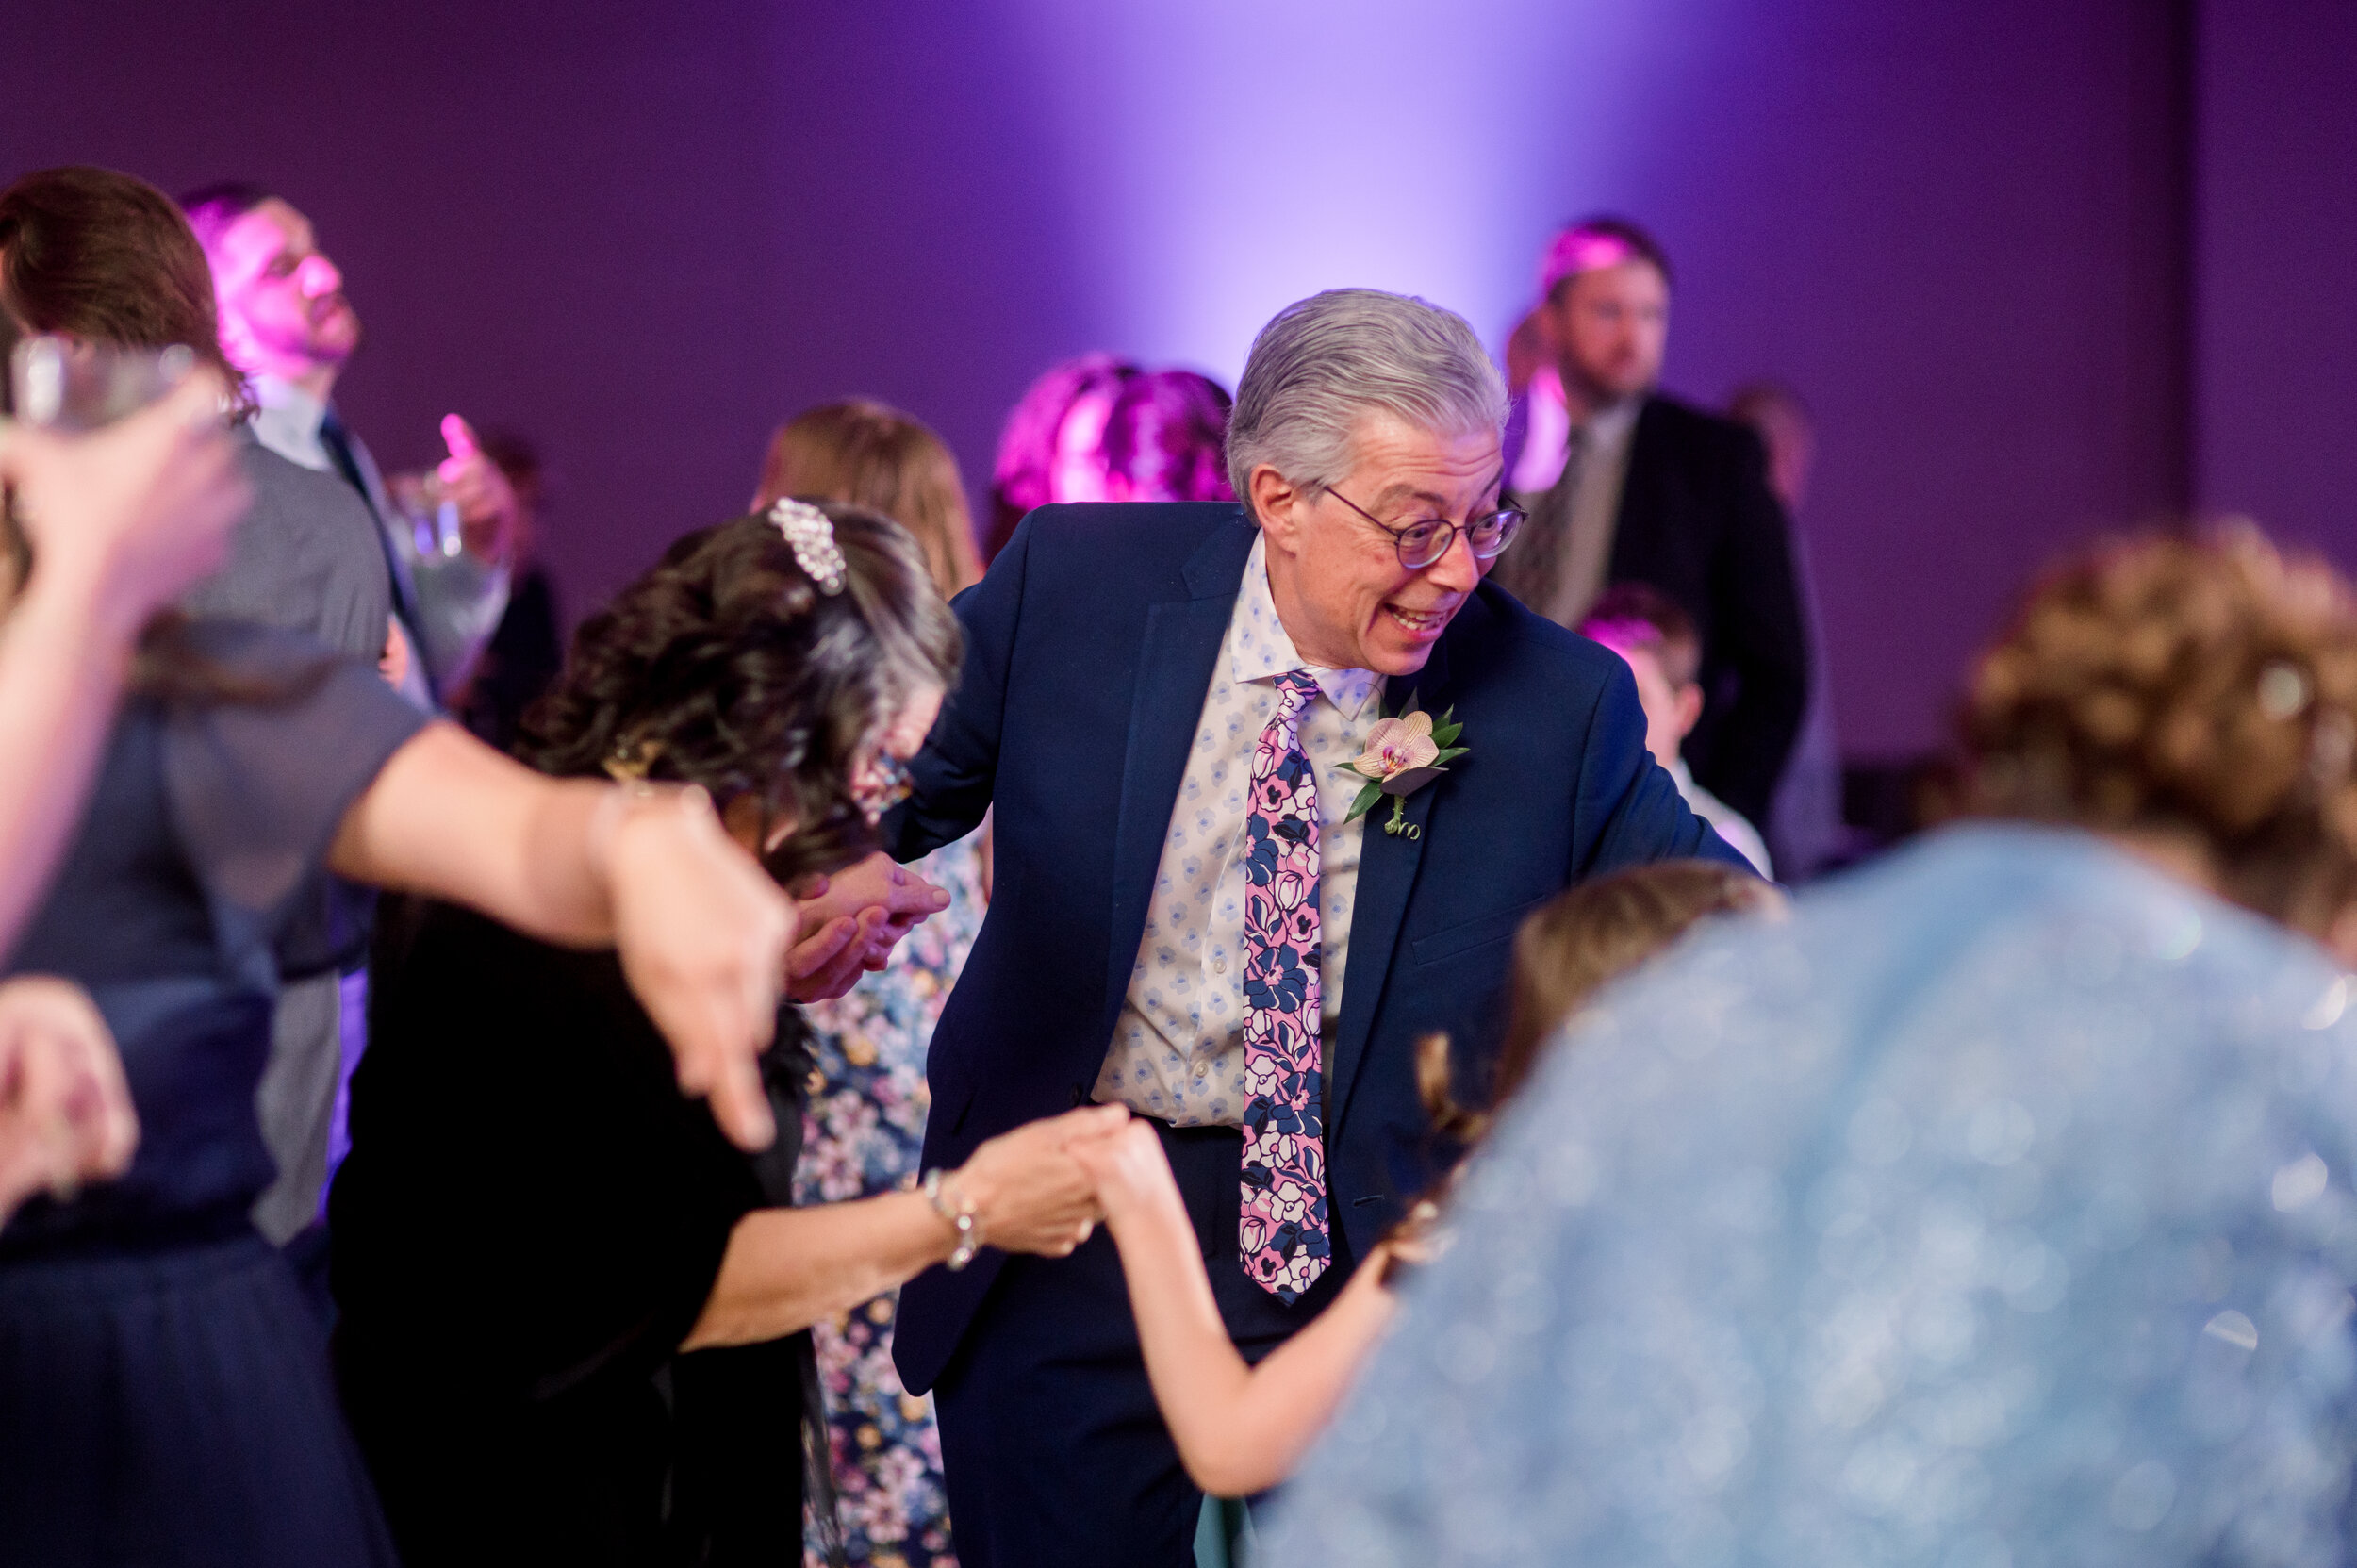 Weddings-at-The-DoubleTree-by-Hilton-Hotel-Pittsburgh-Ashley-Reed-Photography-88.jpg